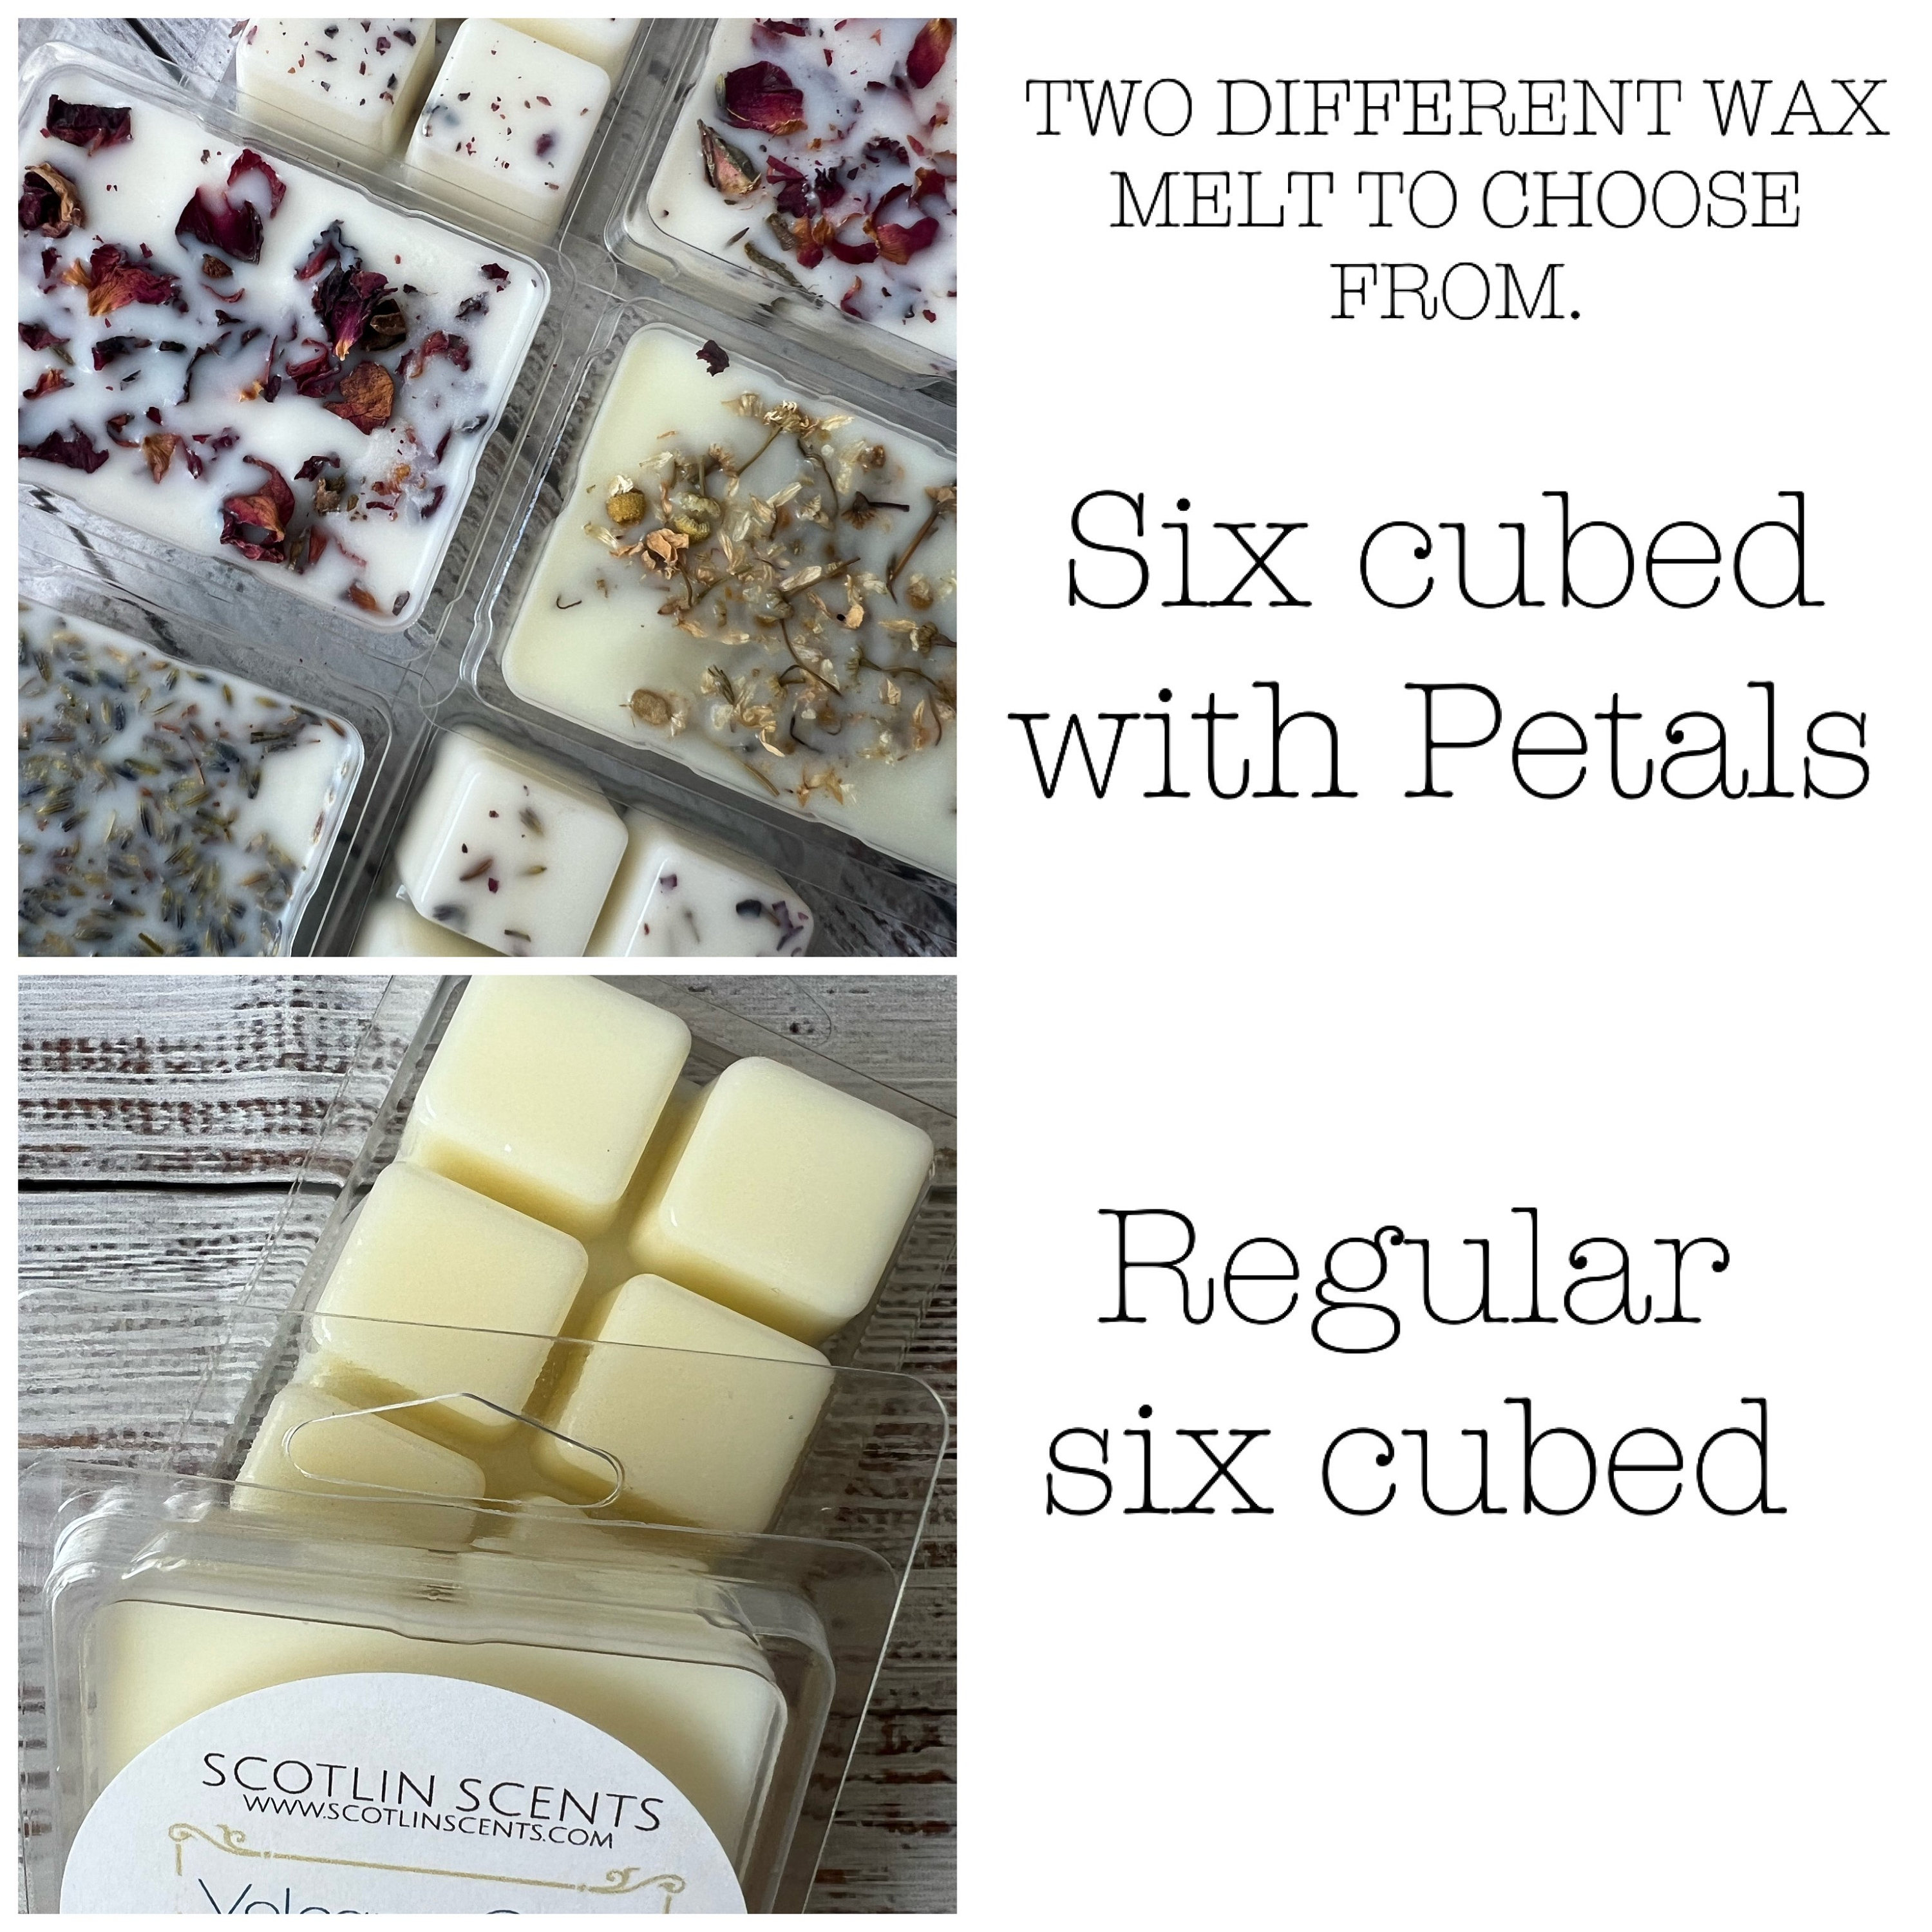 Alluring Scented Wax Melts, ScentSationals, 2.5 oz (1-Pack